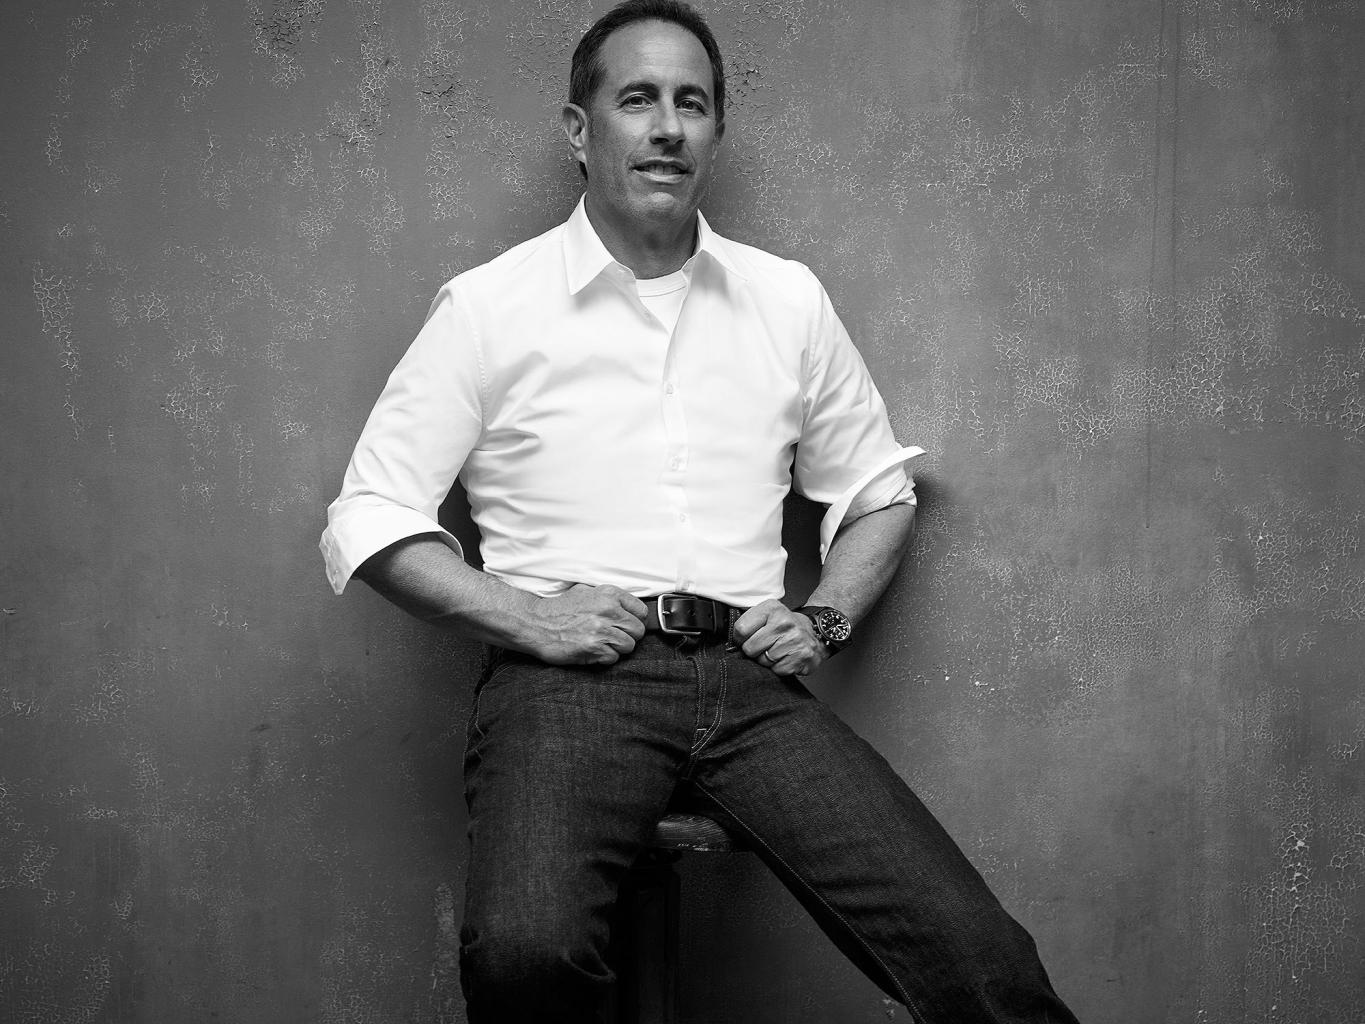 Jerry Seinfeld 'Never' Loses His Temper with His Kids - But Then His Daughter Watched Keeping Up with the Kardashians